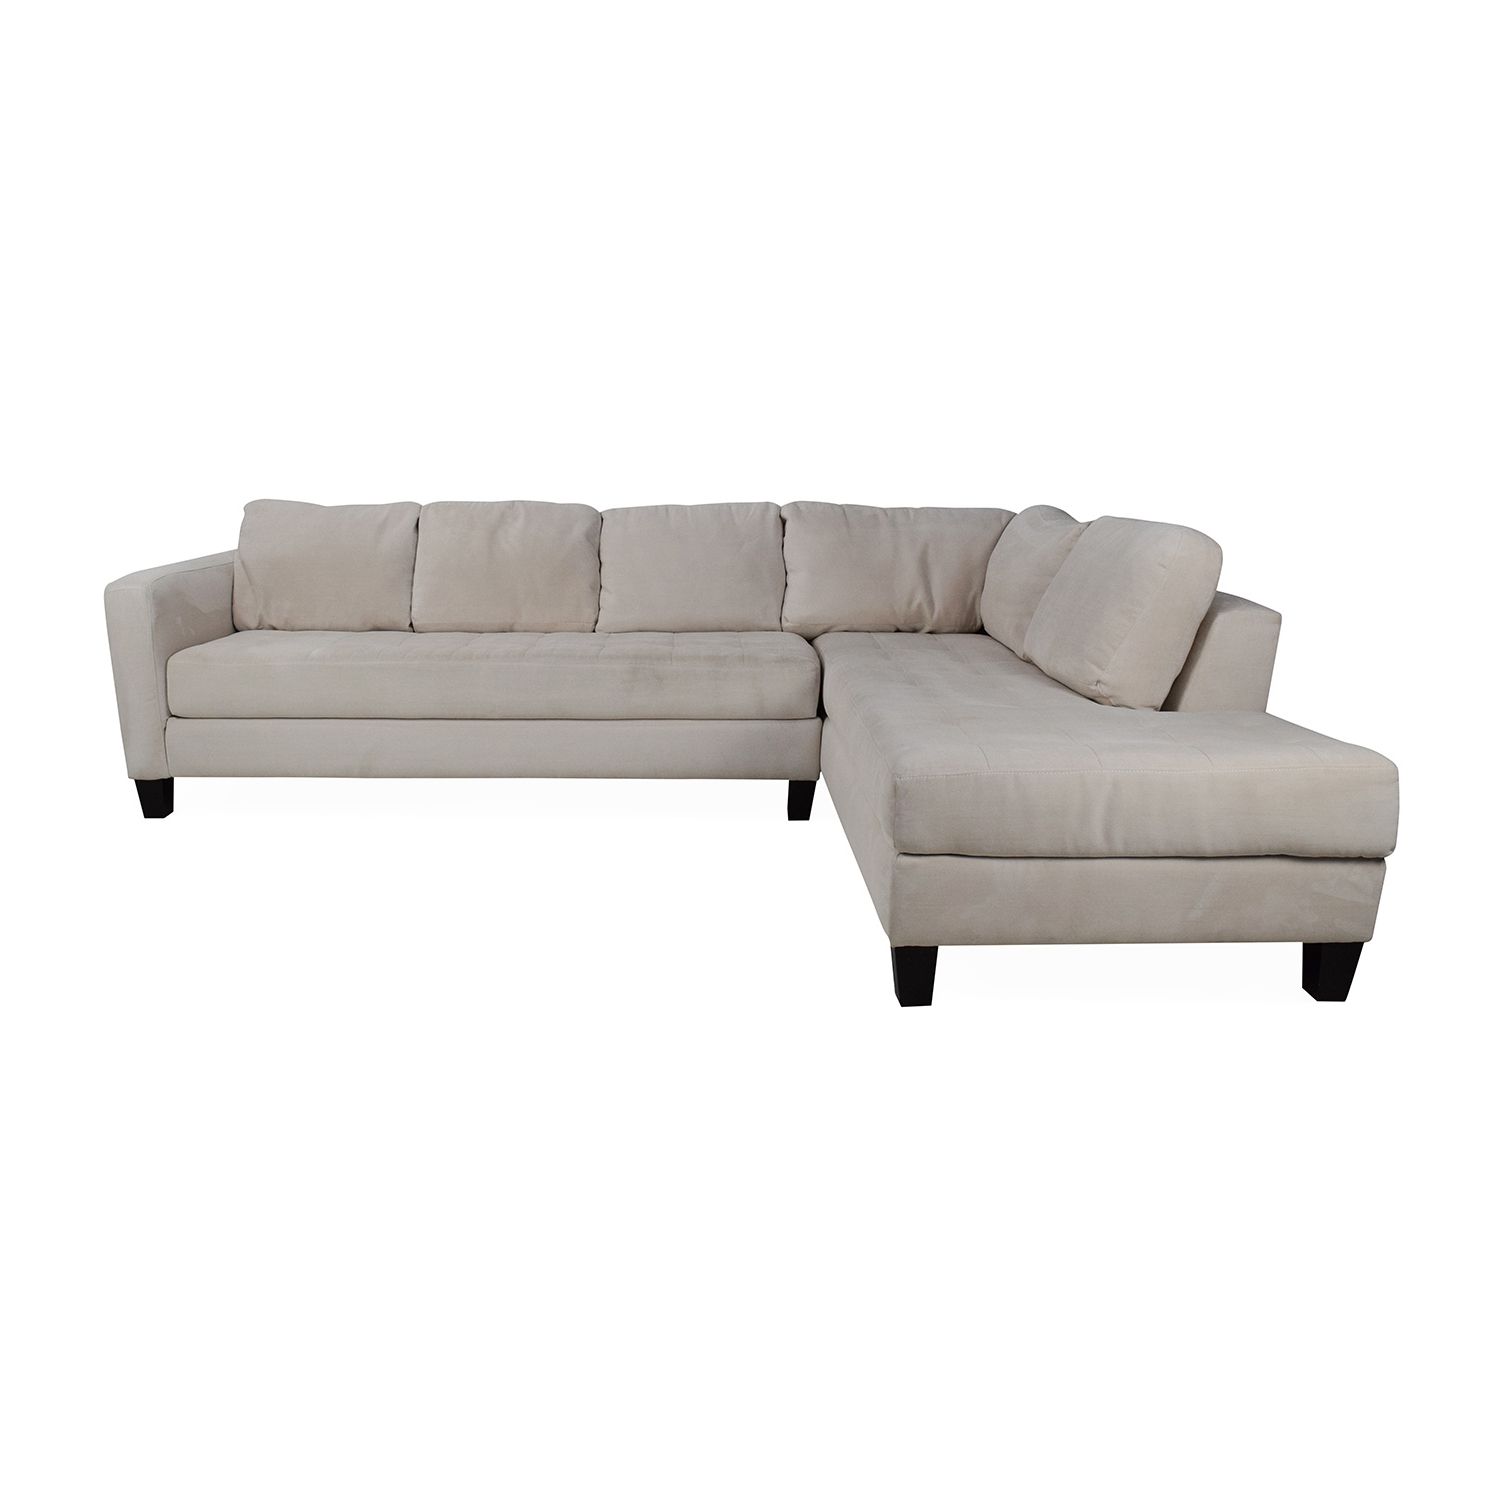 [%65% Off – Macy's Macy's Milo Fabric Microfiber Sectional / Sofas Pertaining To Trendy Macys Sectional Sofas|macys Sectional Sofas In Most Current 65% Off – Macy's Macy's Milo Fabric Microfiber Sectional / Sofas|favorite Macys Sectional Sofas With Regard To 65% Off – Macy's Macy's Milo Fabric Microfiber Sectional / Sofas|current 65% Off – Macy's Macy's Milo Fabric Microfiber Sectional / Sofas In Macys Sectional Sofas%] (Photo 1 of 15)